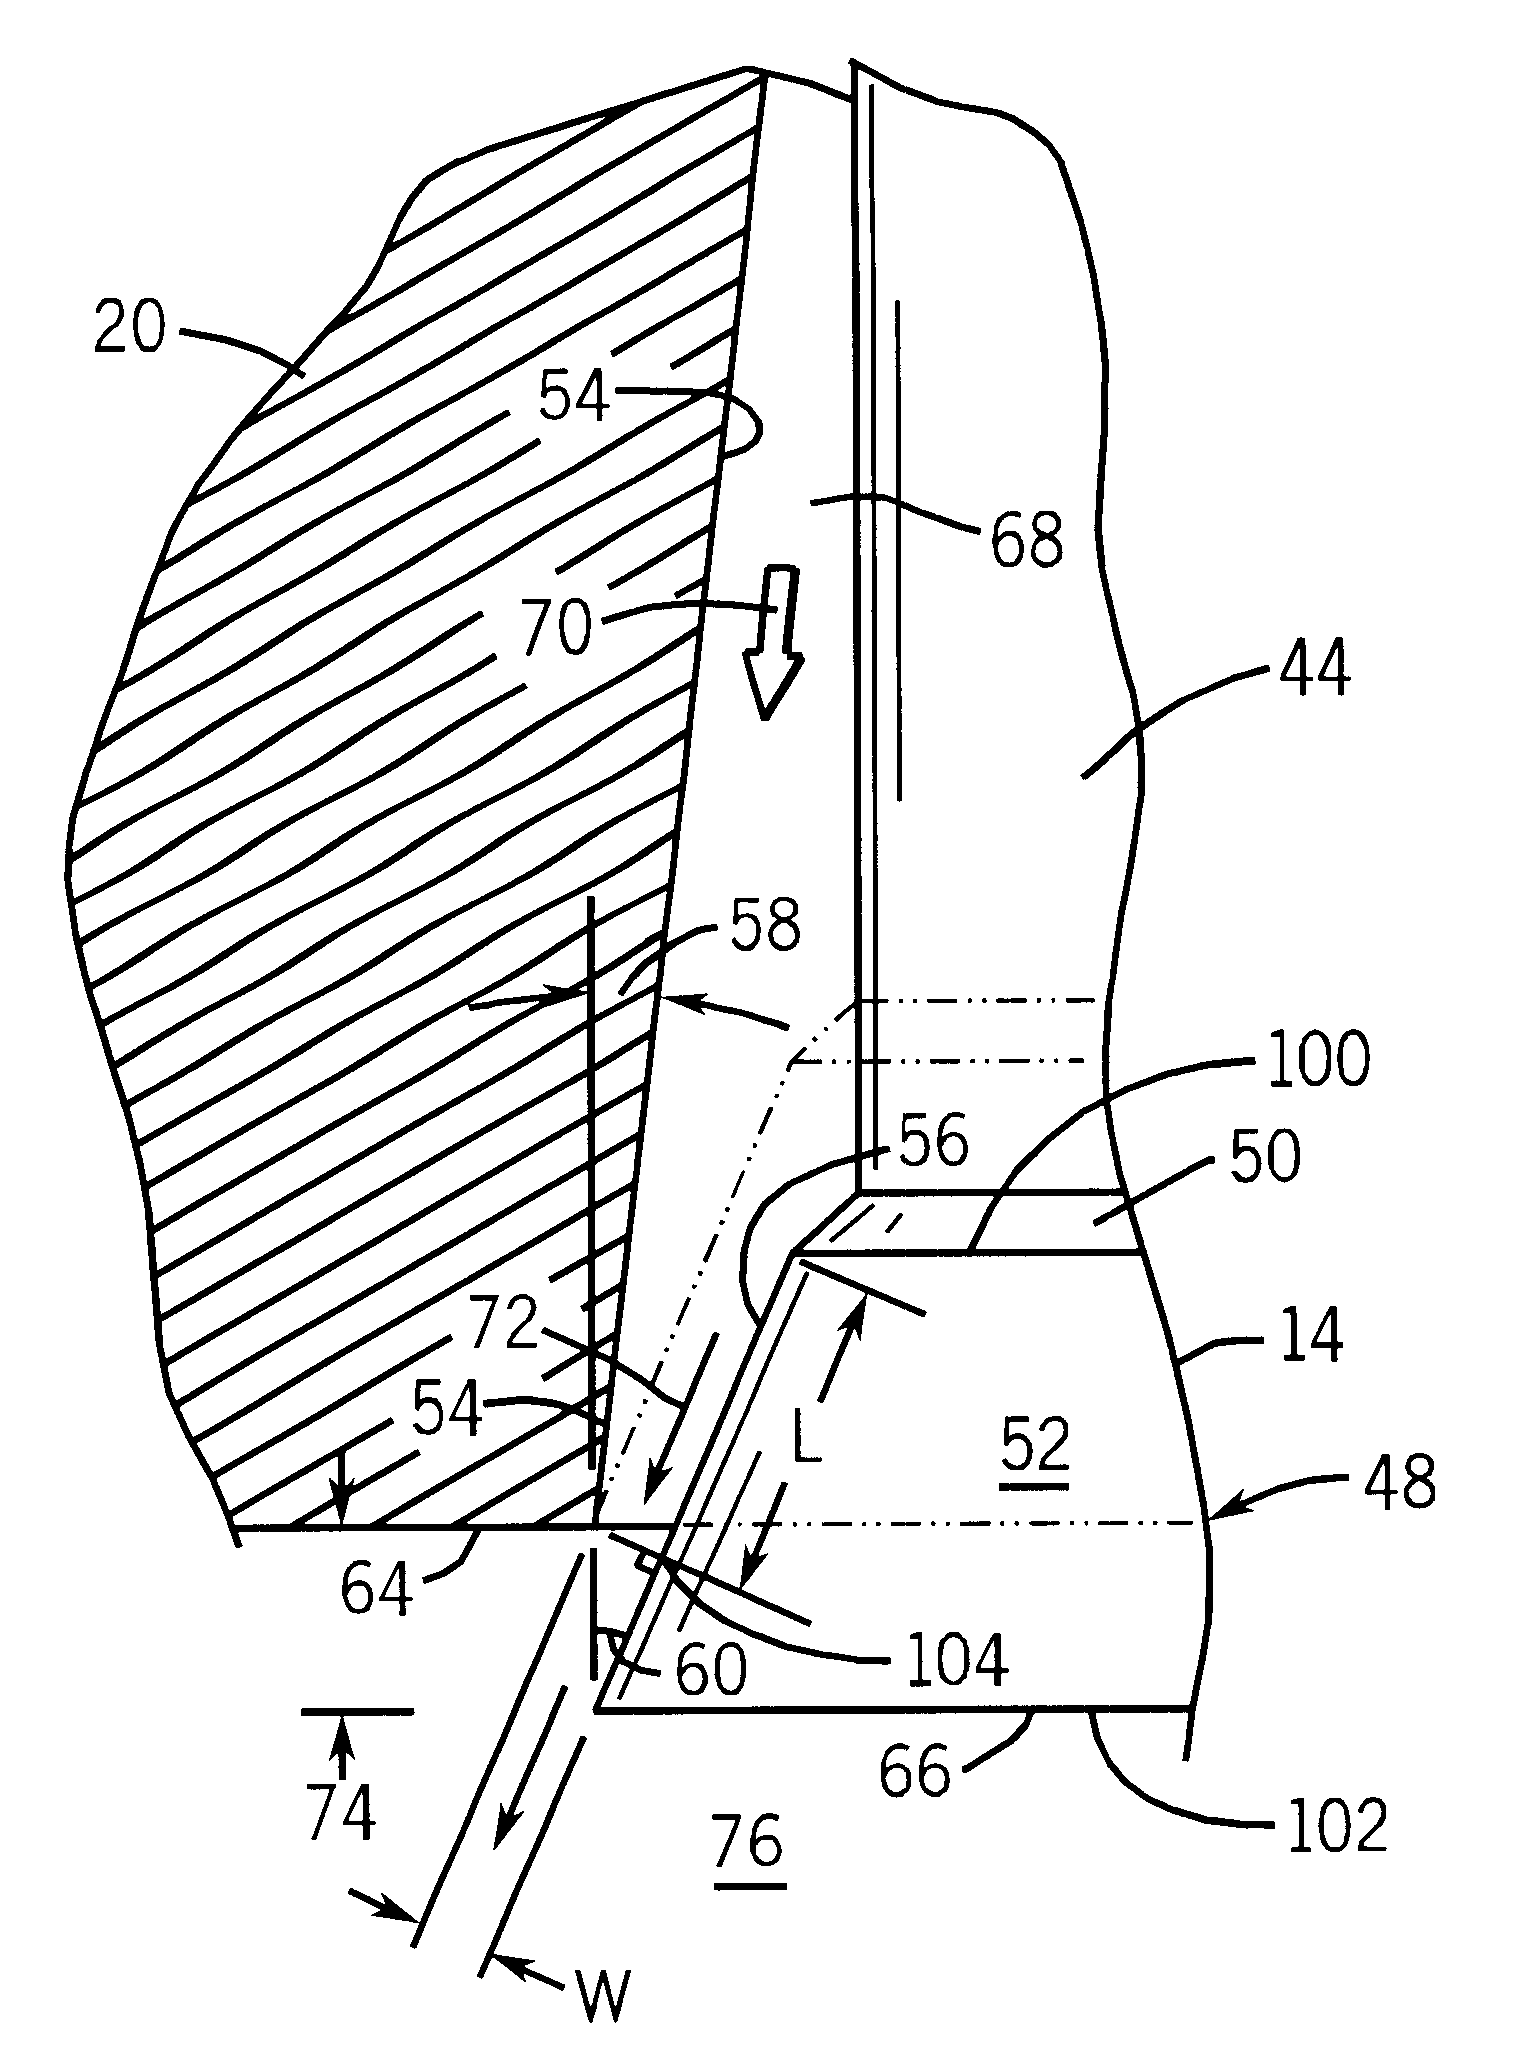 Fuel injector for internal combustion engines and method for making same